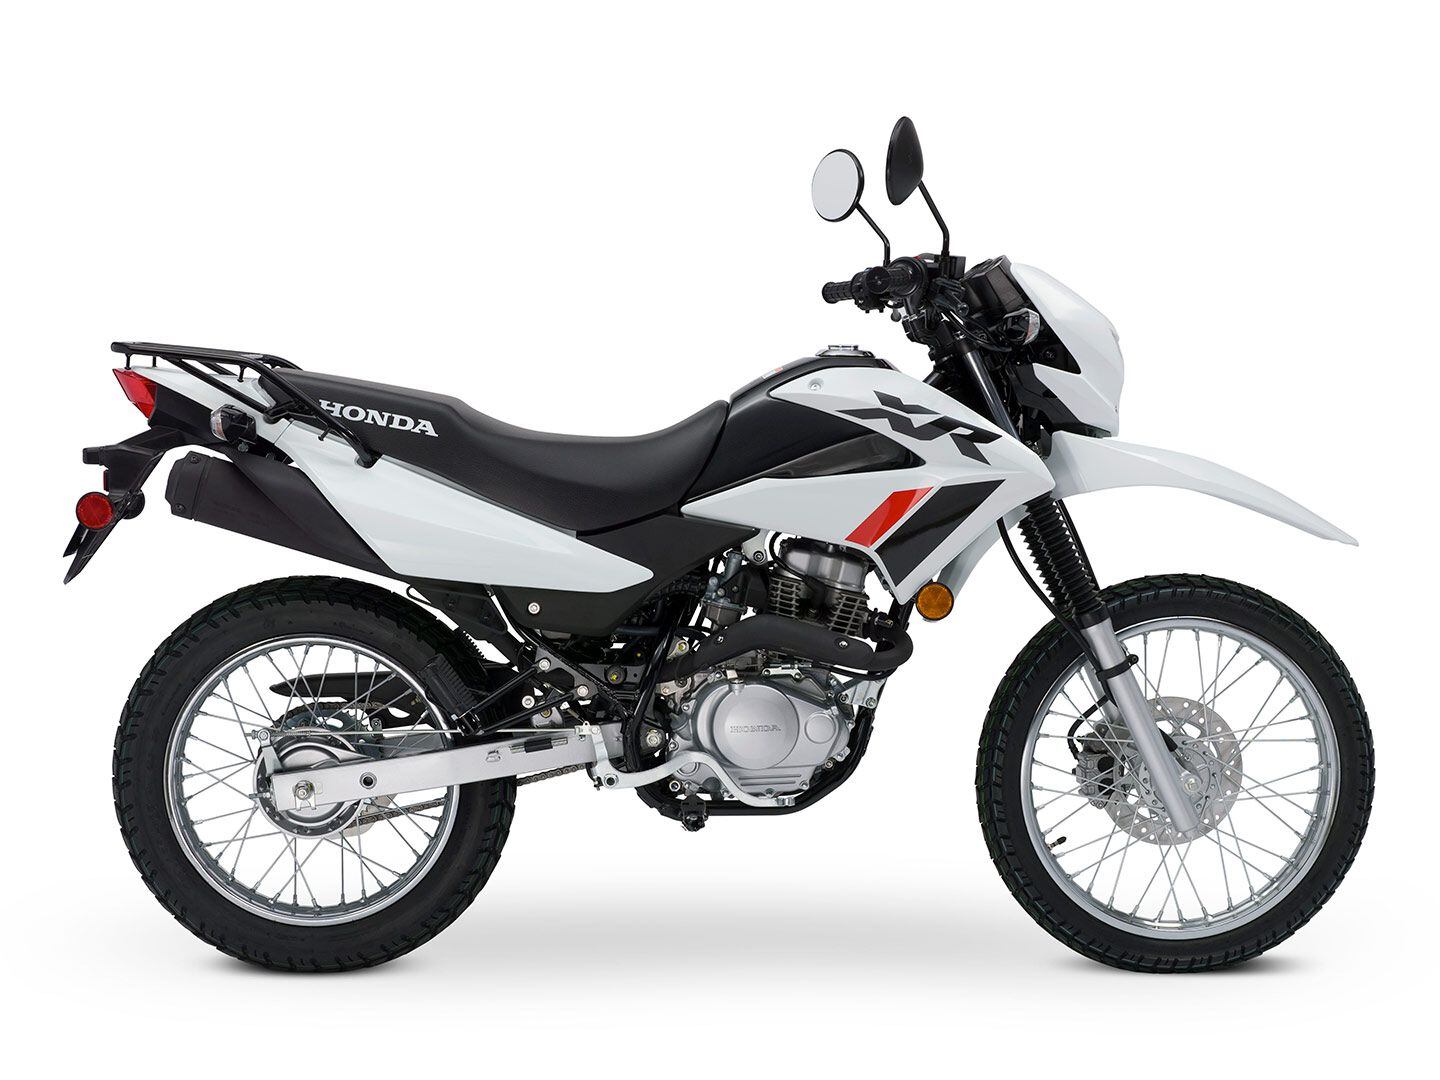 Honda’s focus on fun and efficient two-wheel models has created a long list of accessible dual sports, including the new-rider-friendly XR150L.